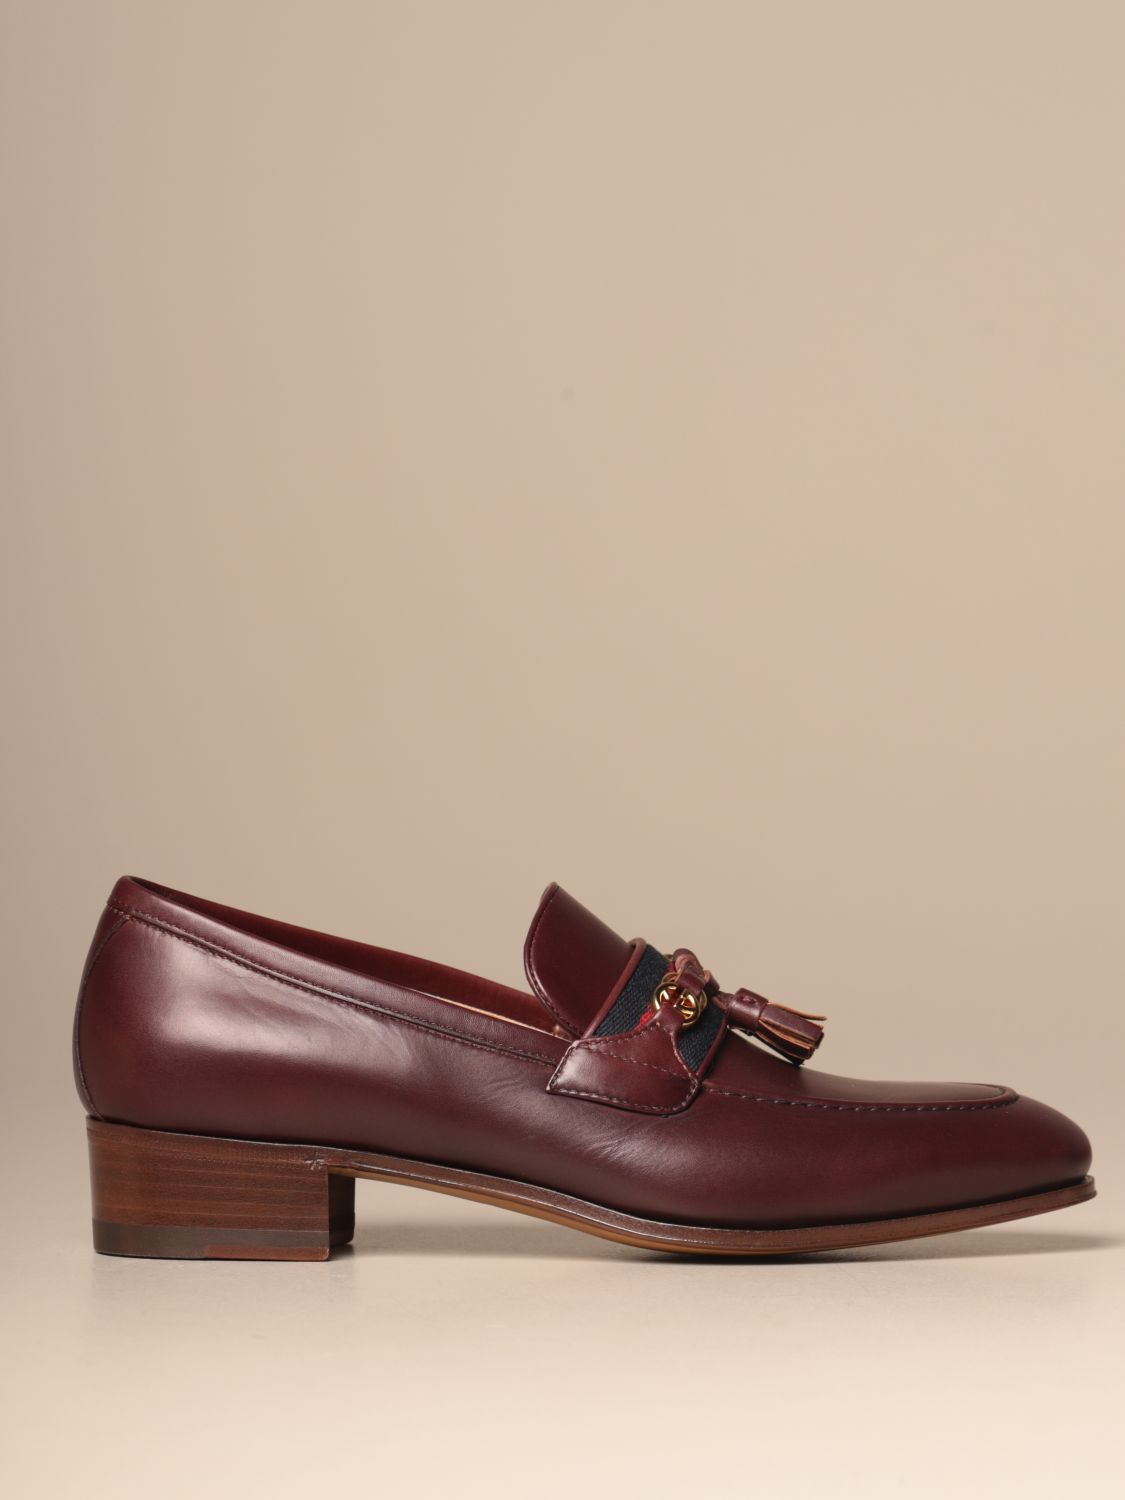 GUCCI: Paride loafer leather with Web band - Burgundy Gucci 624316 1W610 online on GIGLIO.COM